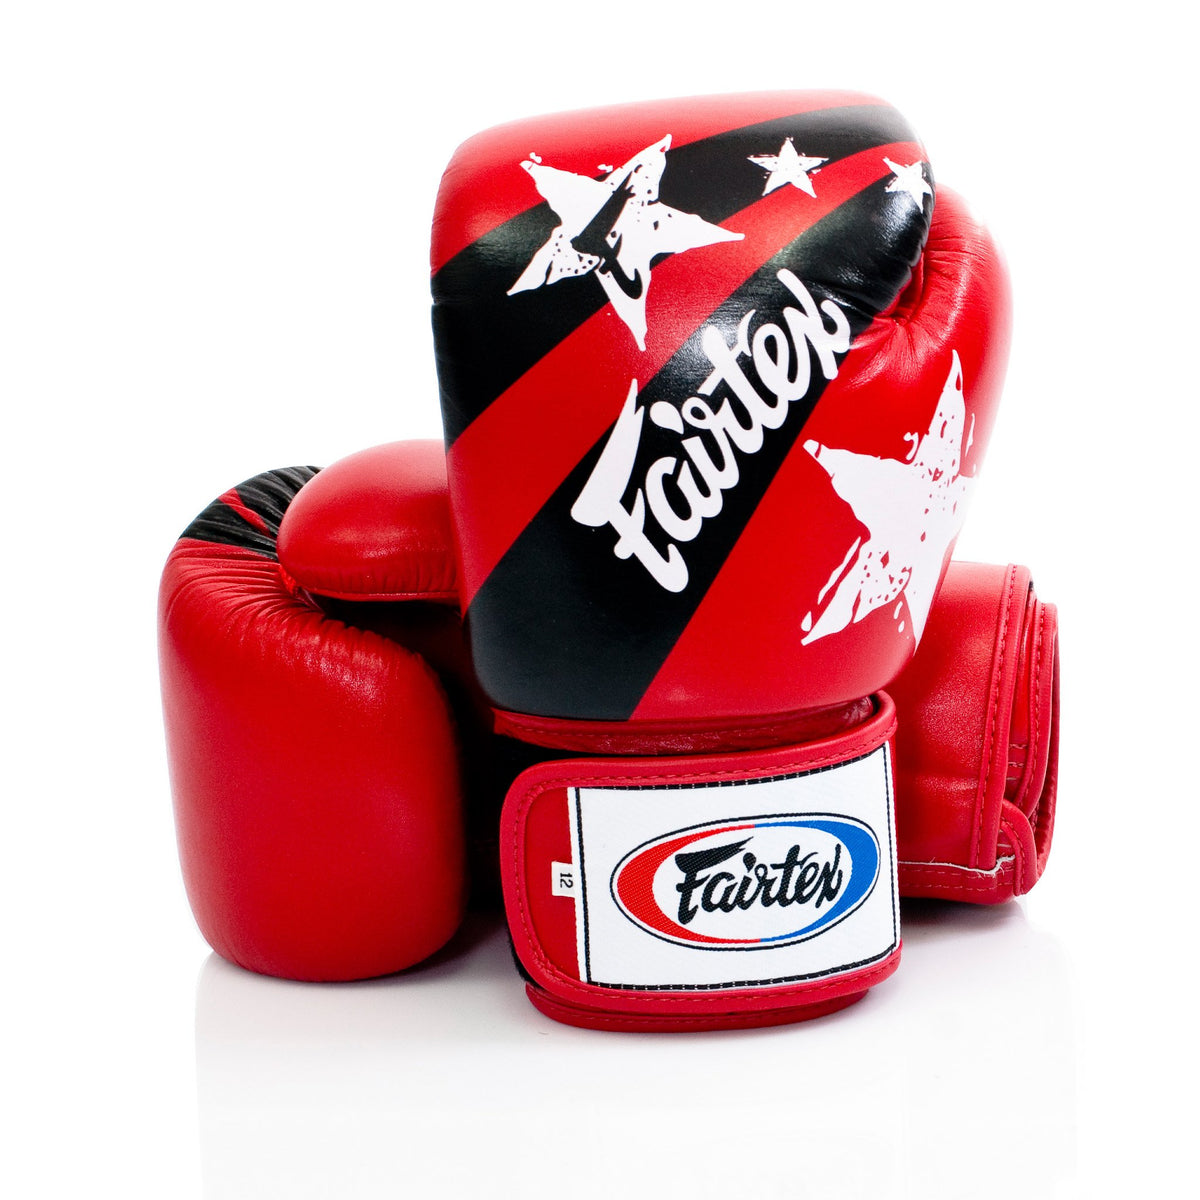 Fairtex- Universal Gloves "Tight-Fit" Design-Nation Prints Collection